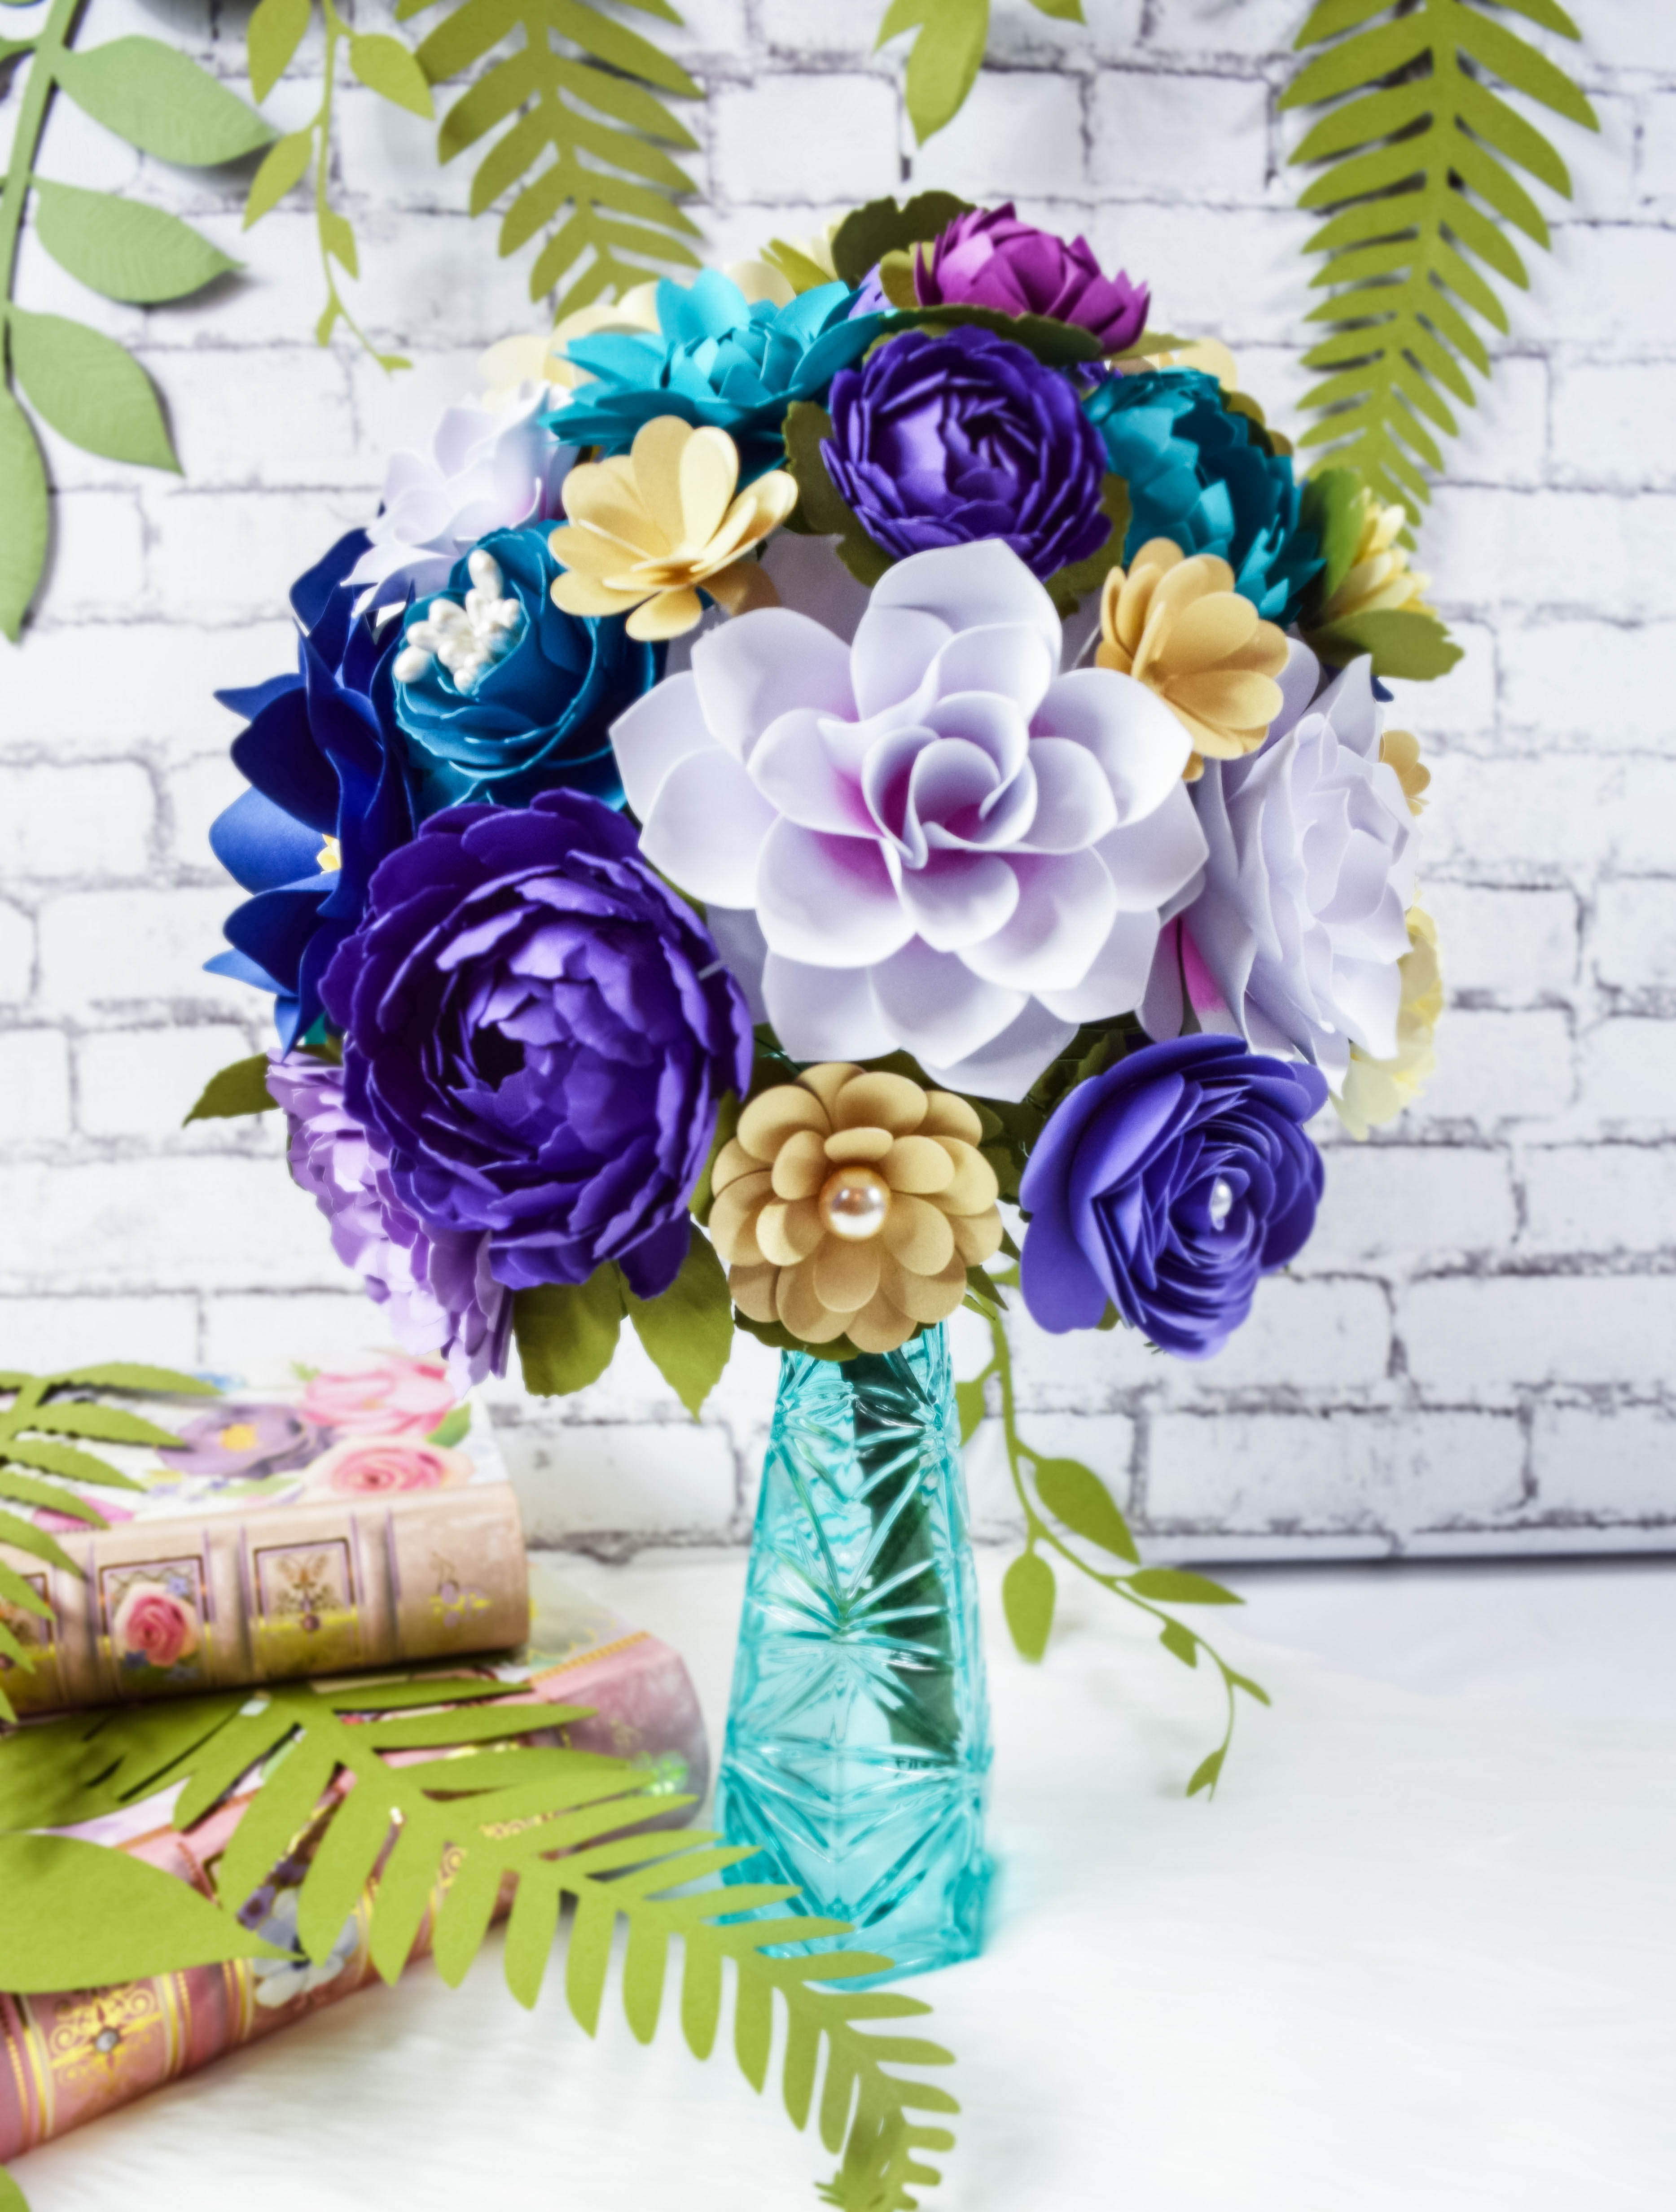 How to Stem a Paper Flower for Bouquets and Arrangements